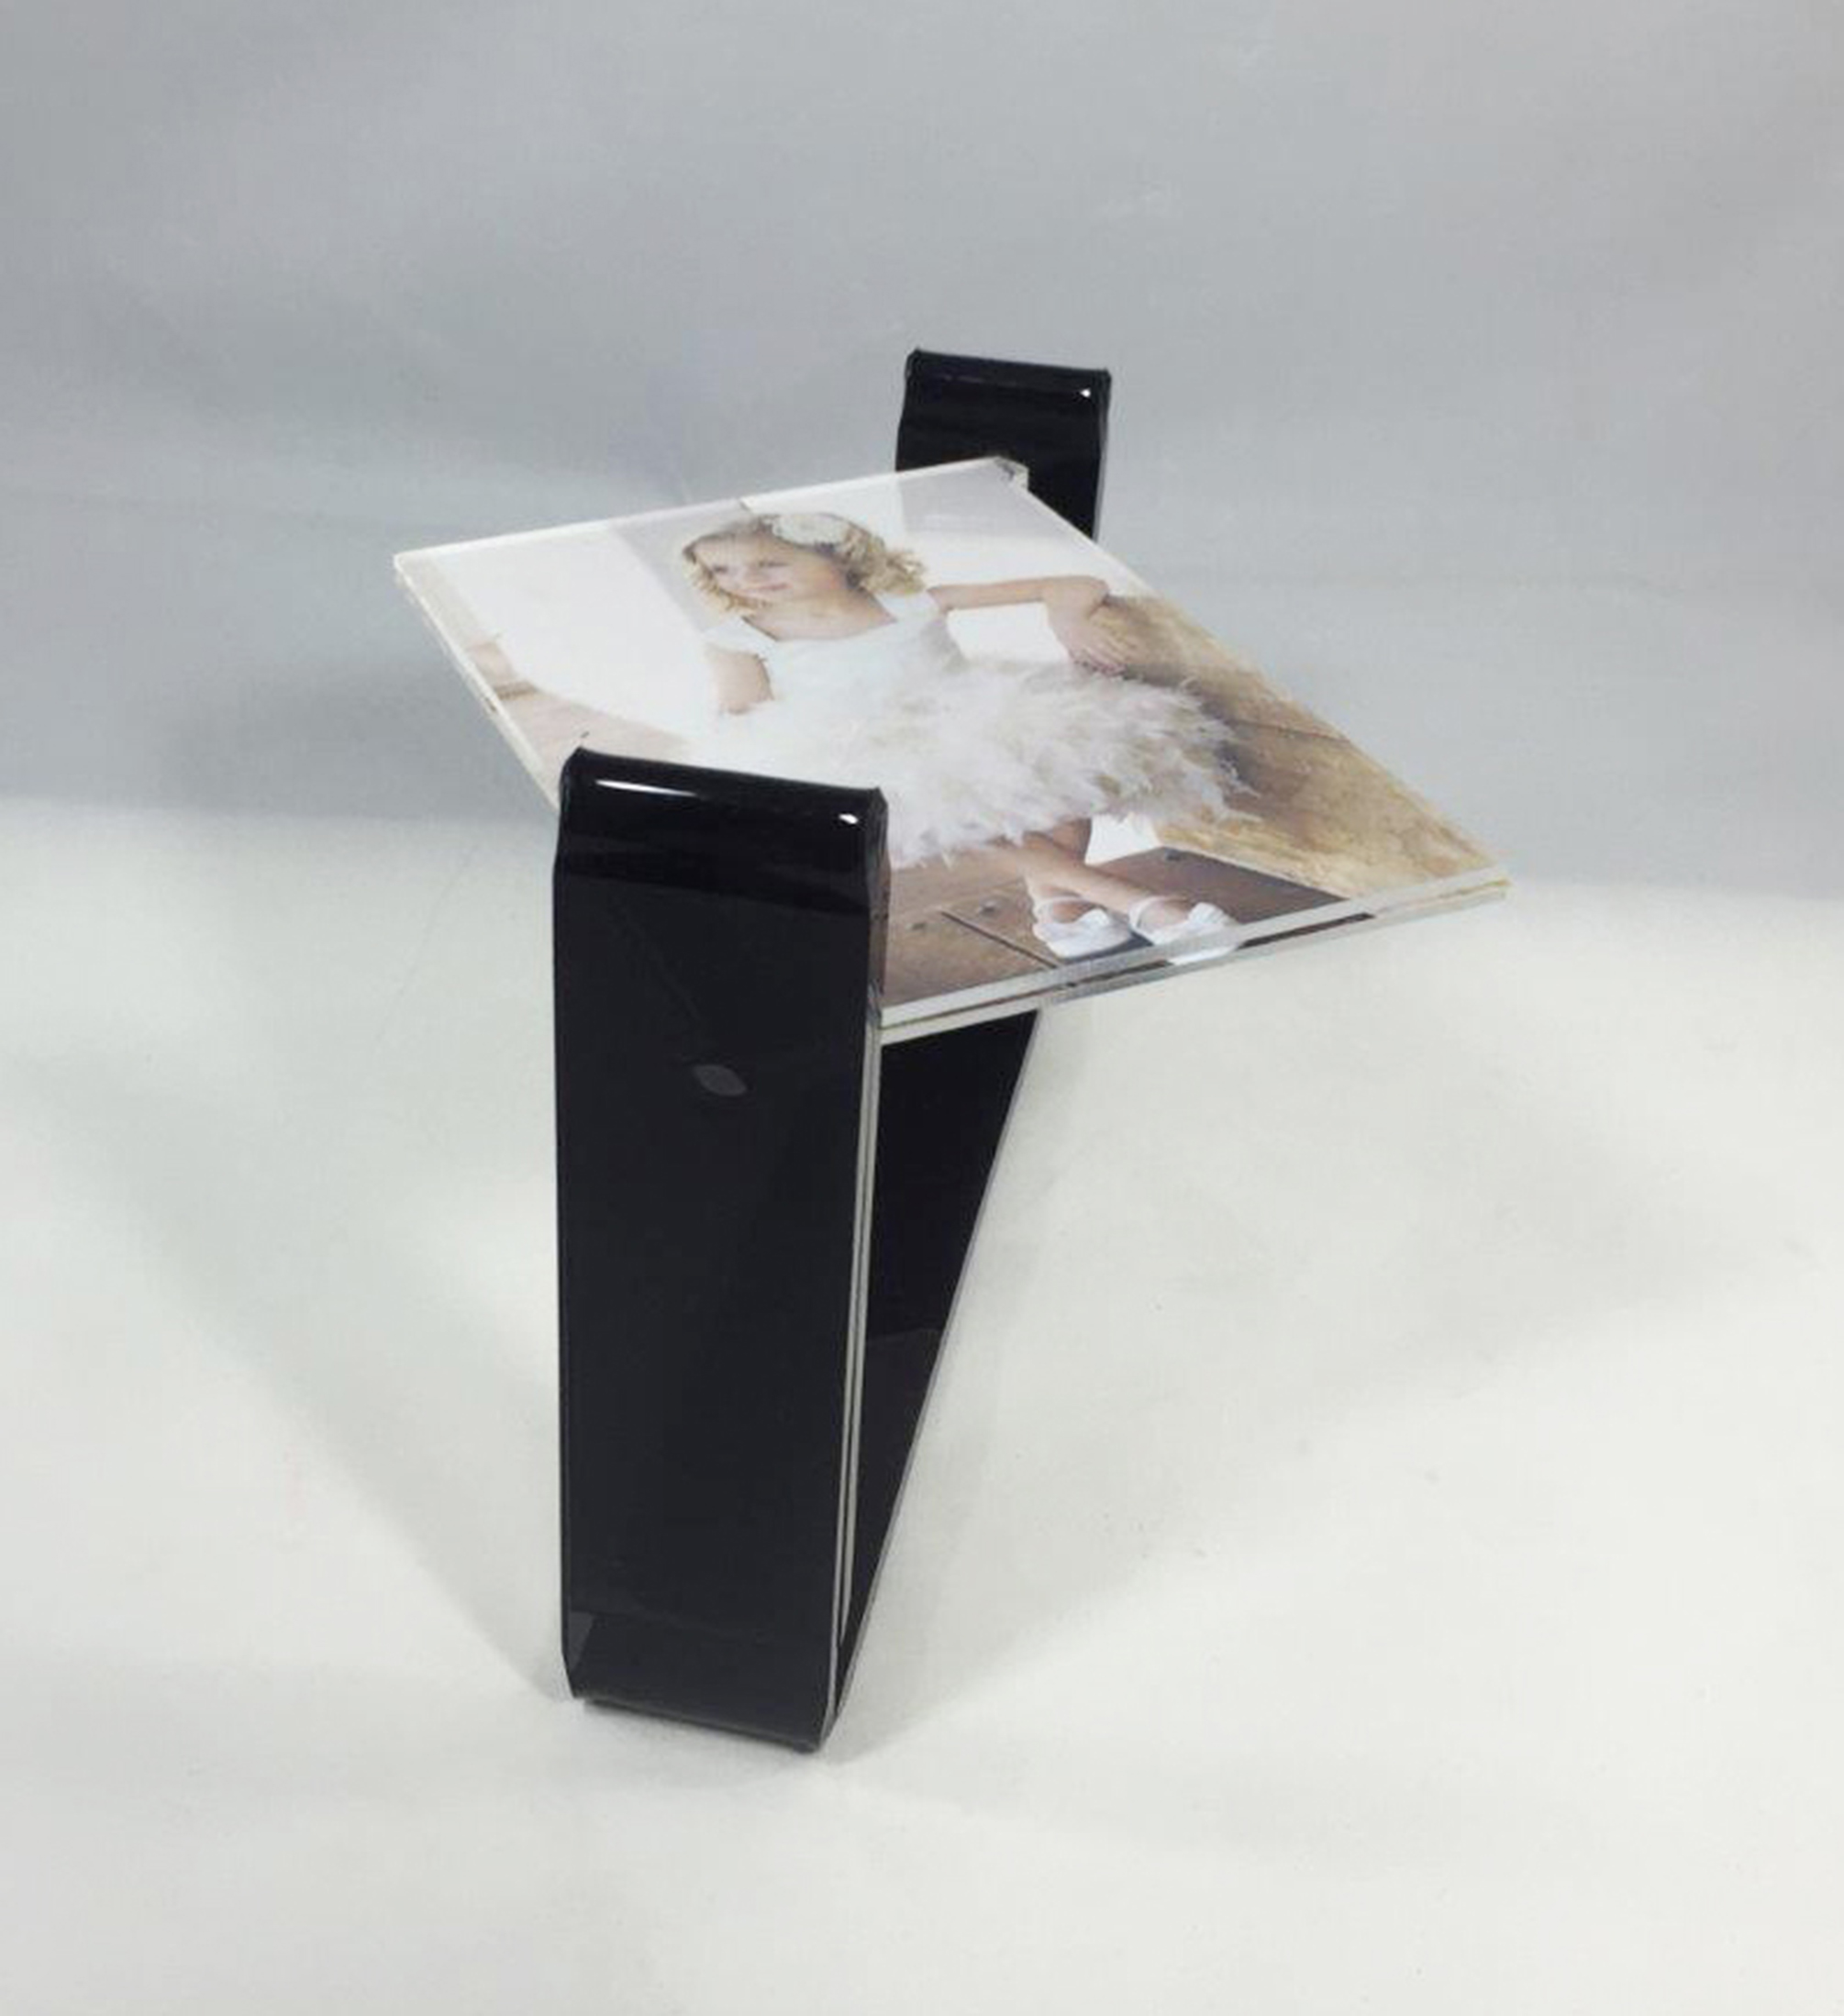 Acrylic Tabletop 4x6 Spinner Picture Photo Frame Menu Holder Display